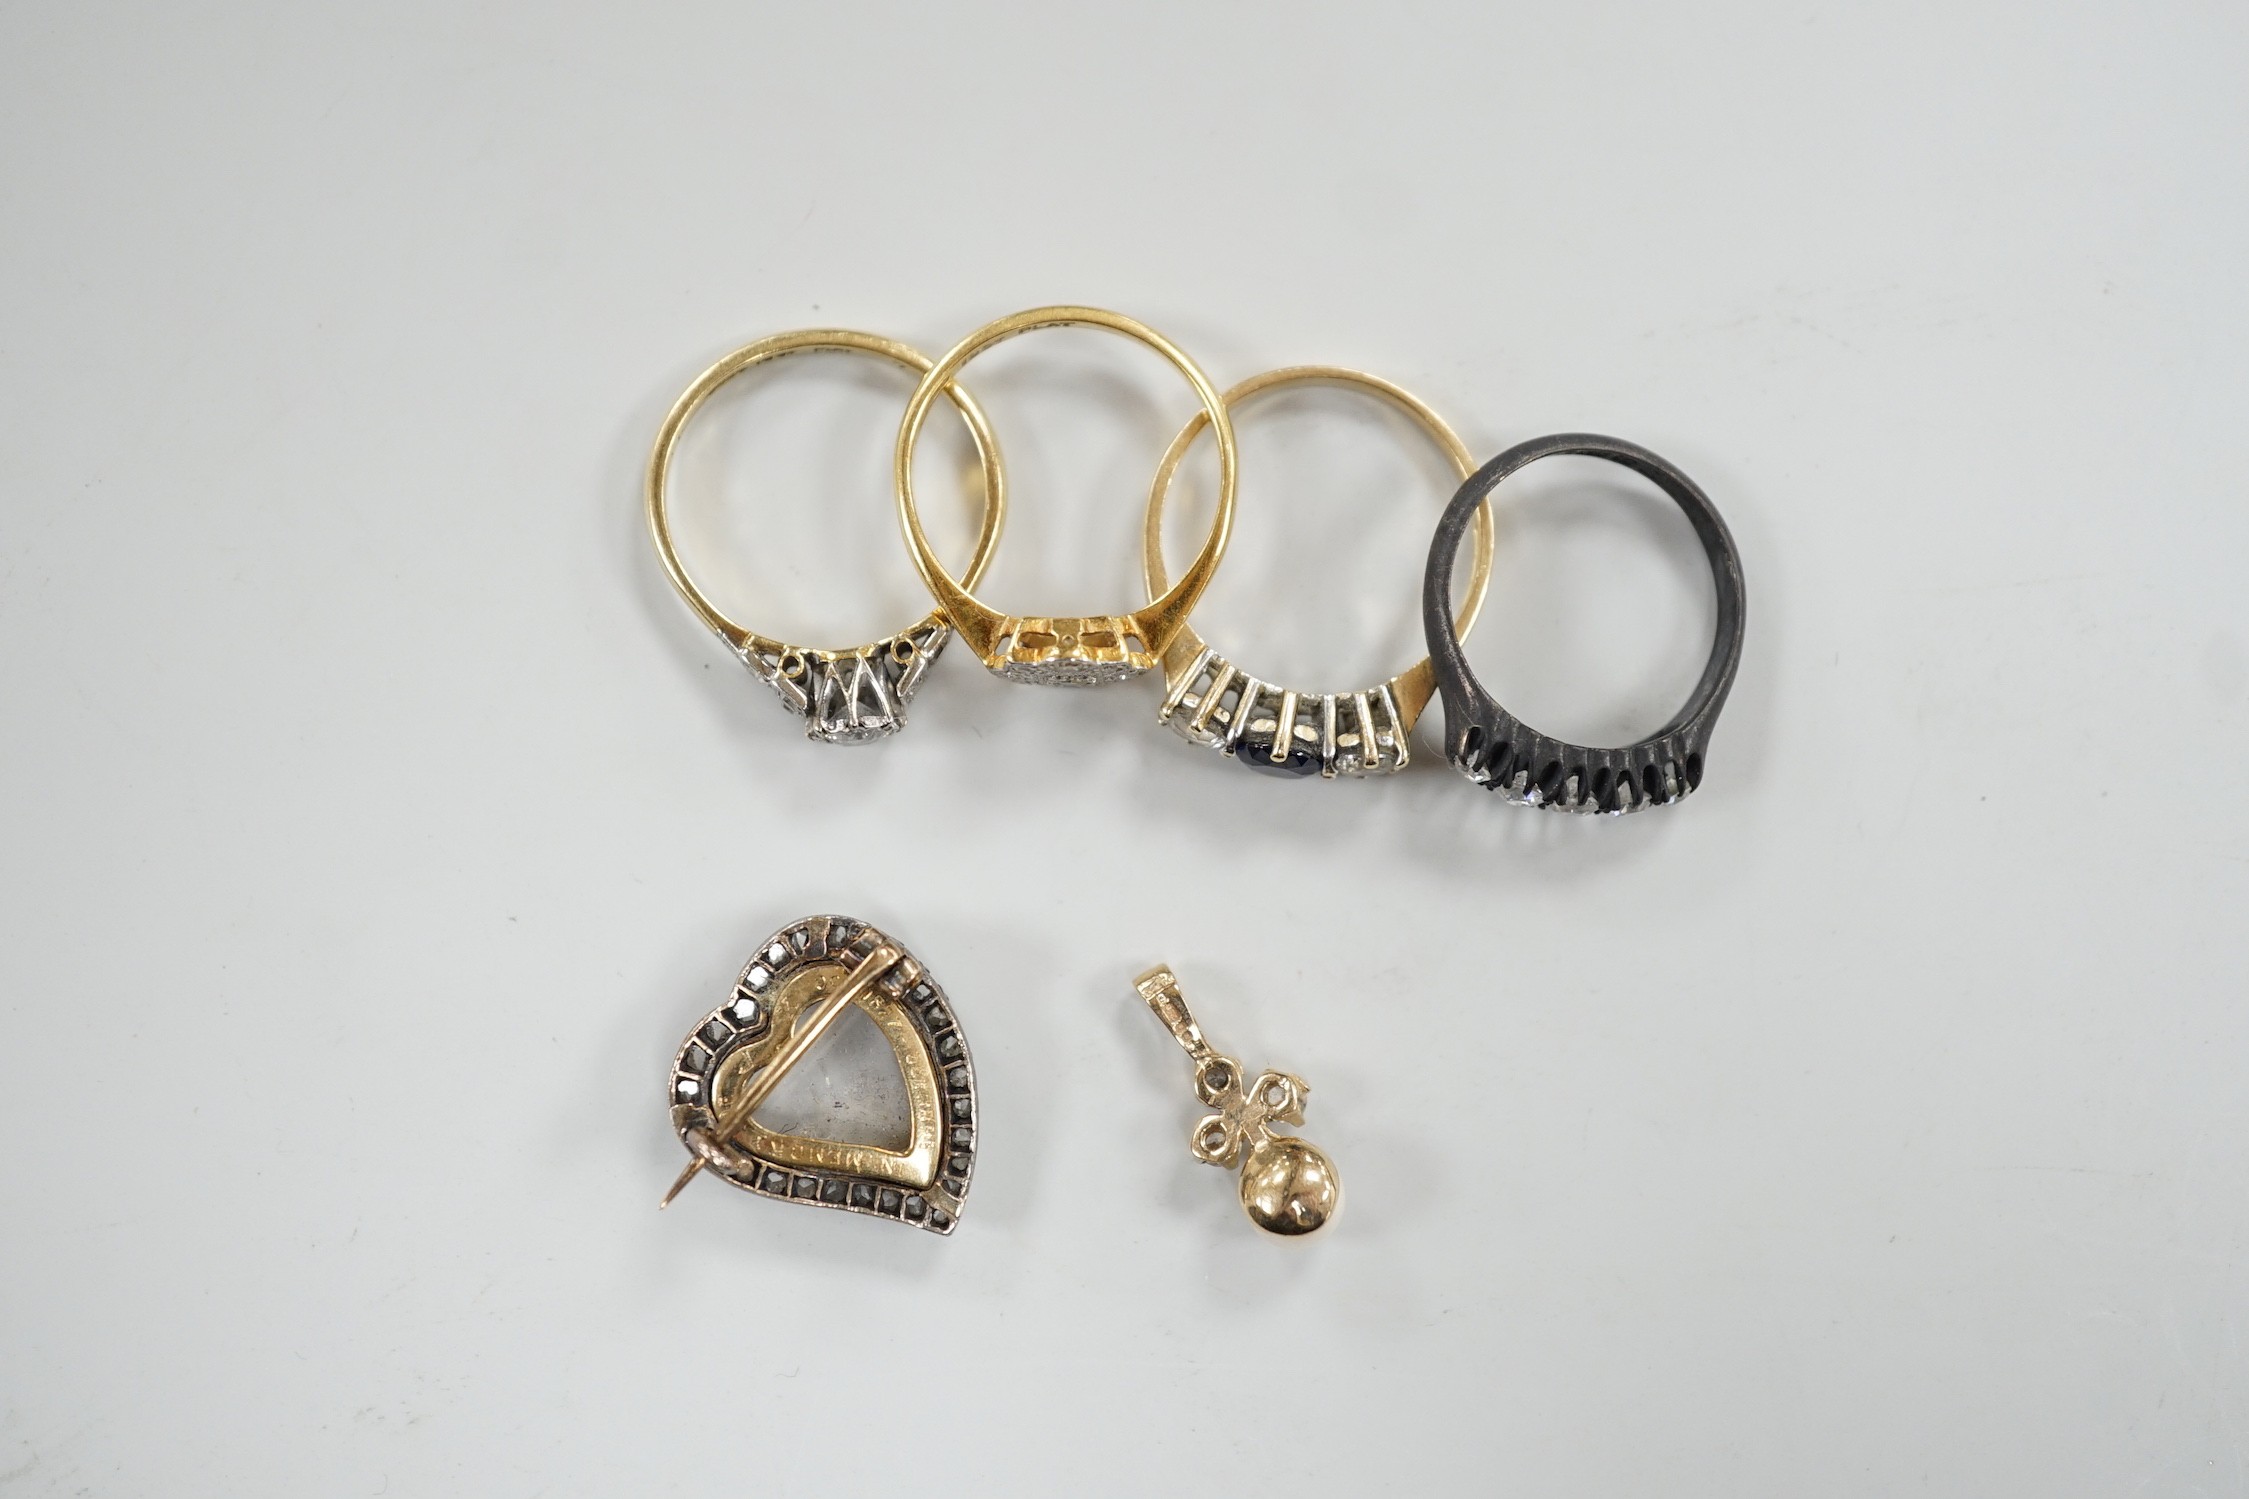 An 18ct, plat and single stone diamond ring, with diamond set shoulders, size O, a similar diamond cluster ring, size N, a blackened? 18ct gold and five stone diamond ring, a late Victorian diamond set heart shaped mourn